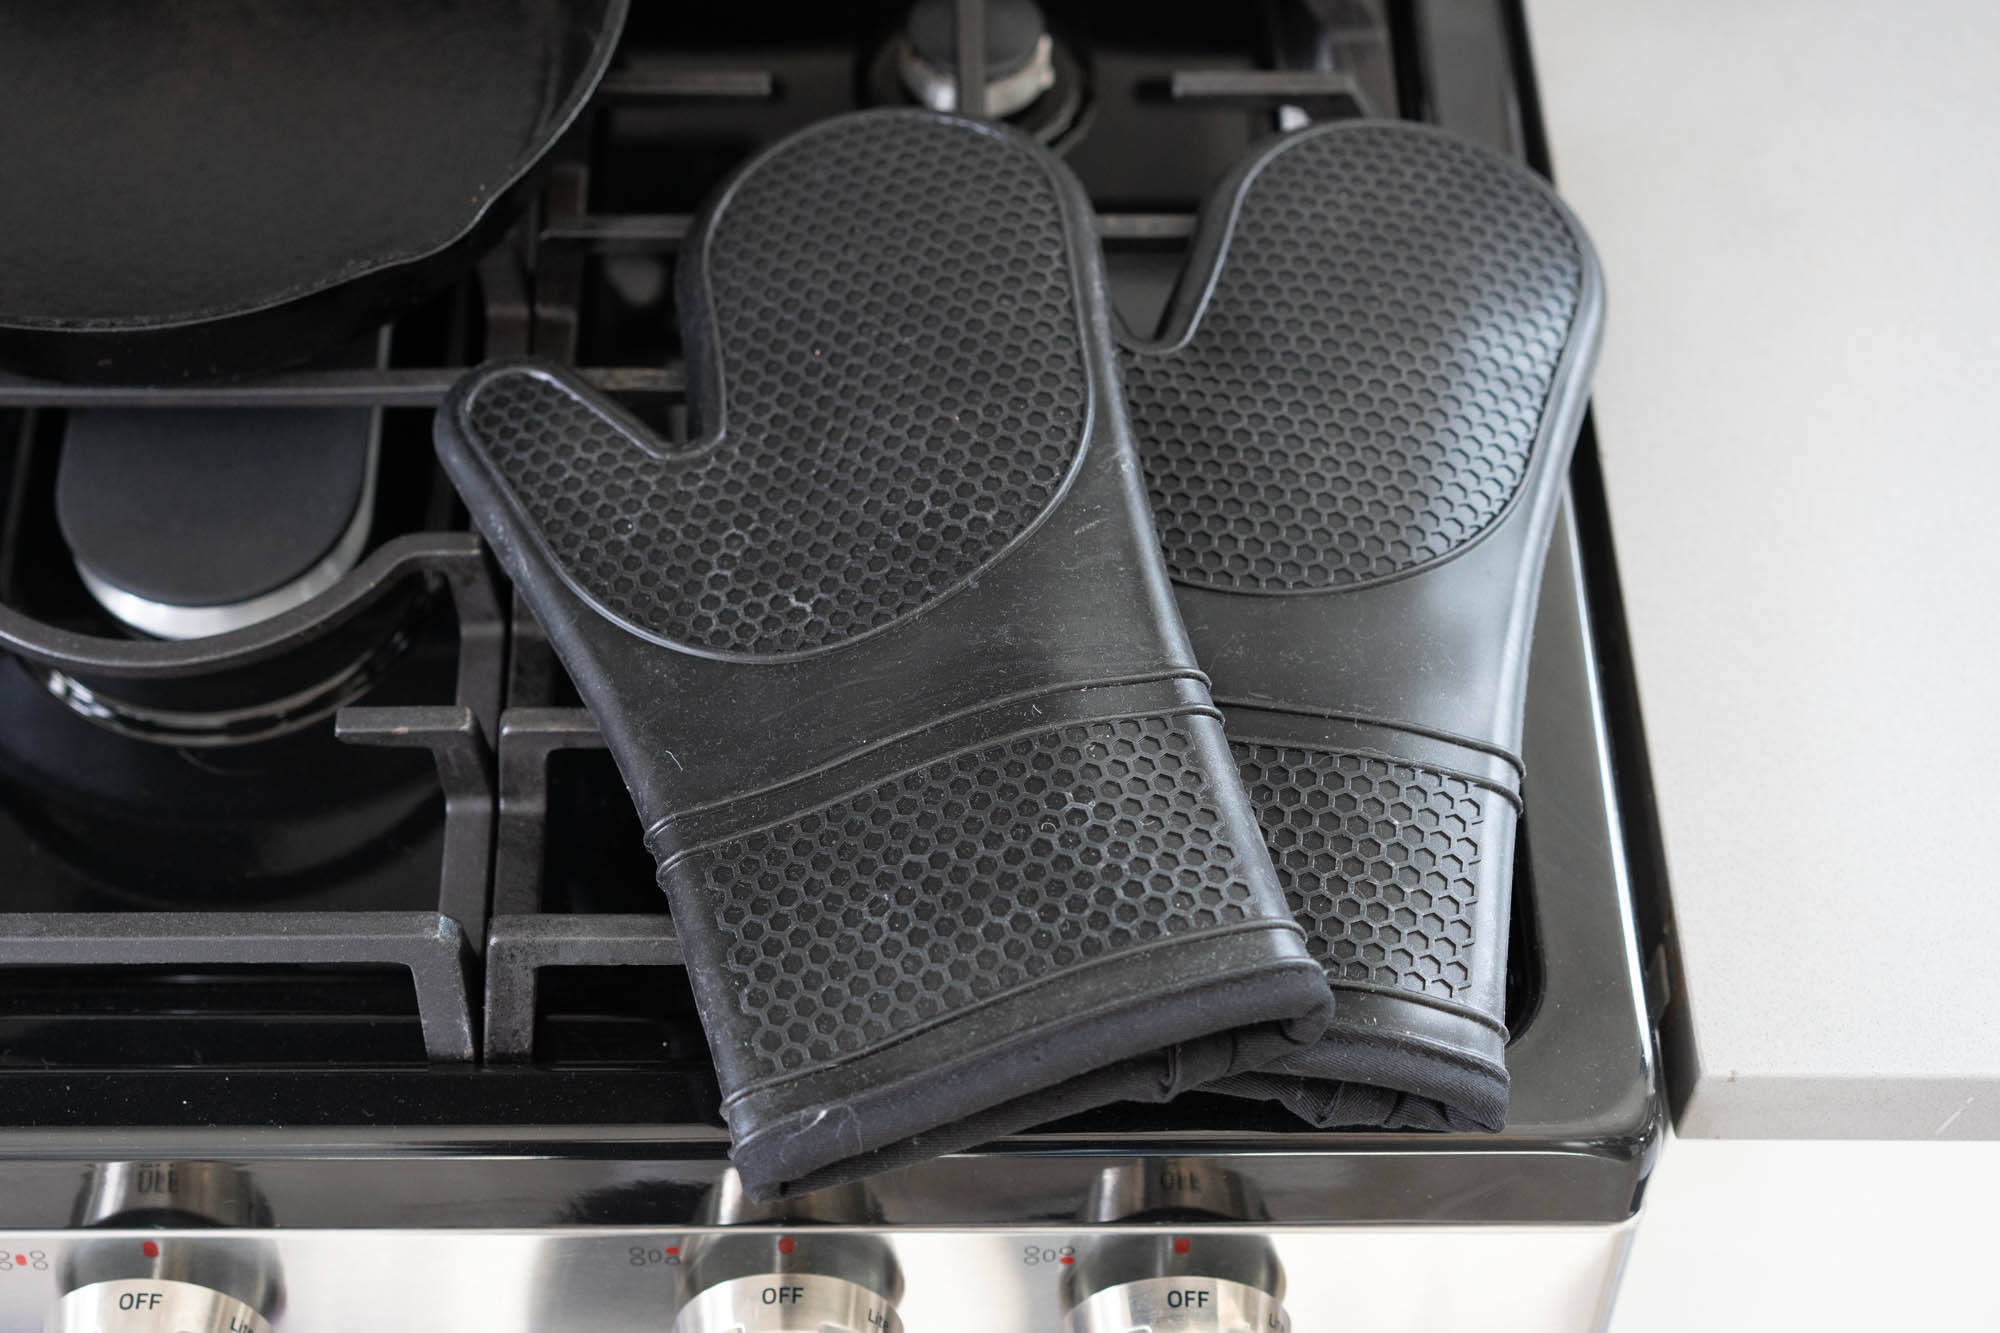 These 'Amazingly Insulated' Oven Mitts Grip 'Better Than a Lobster